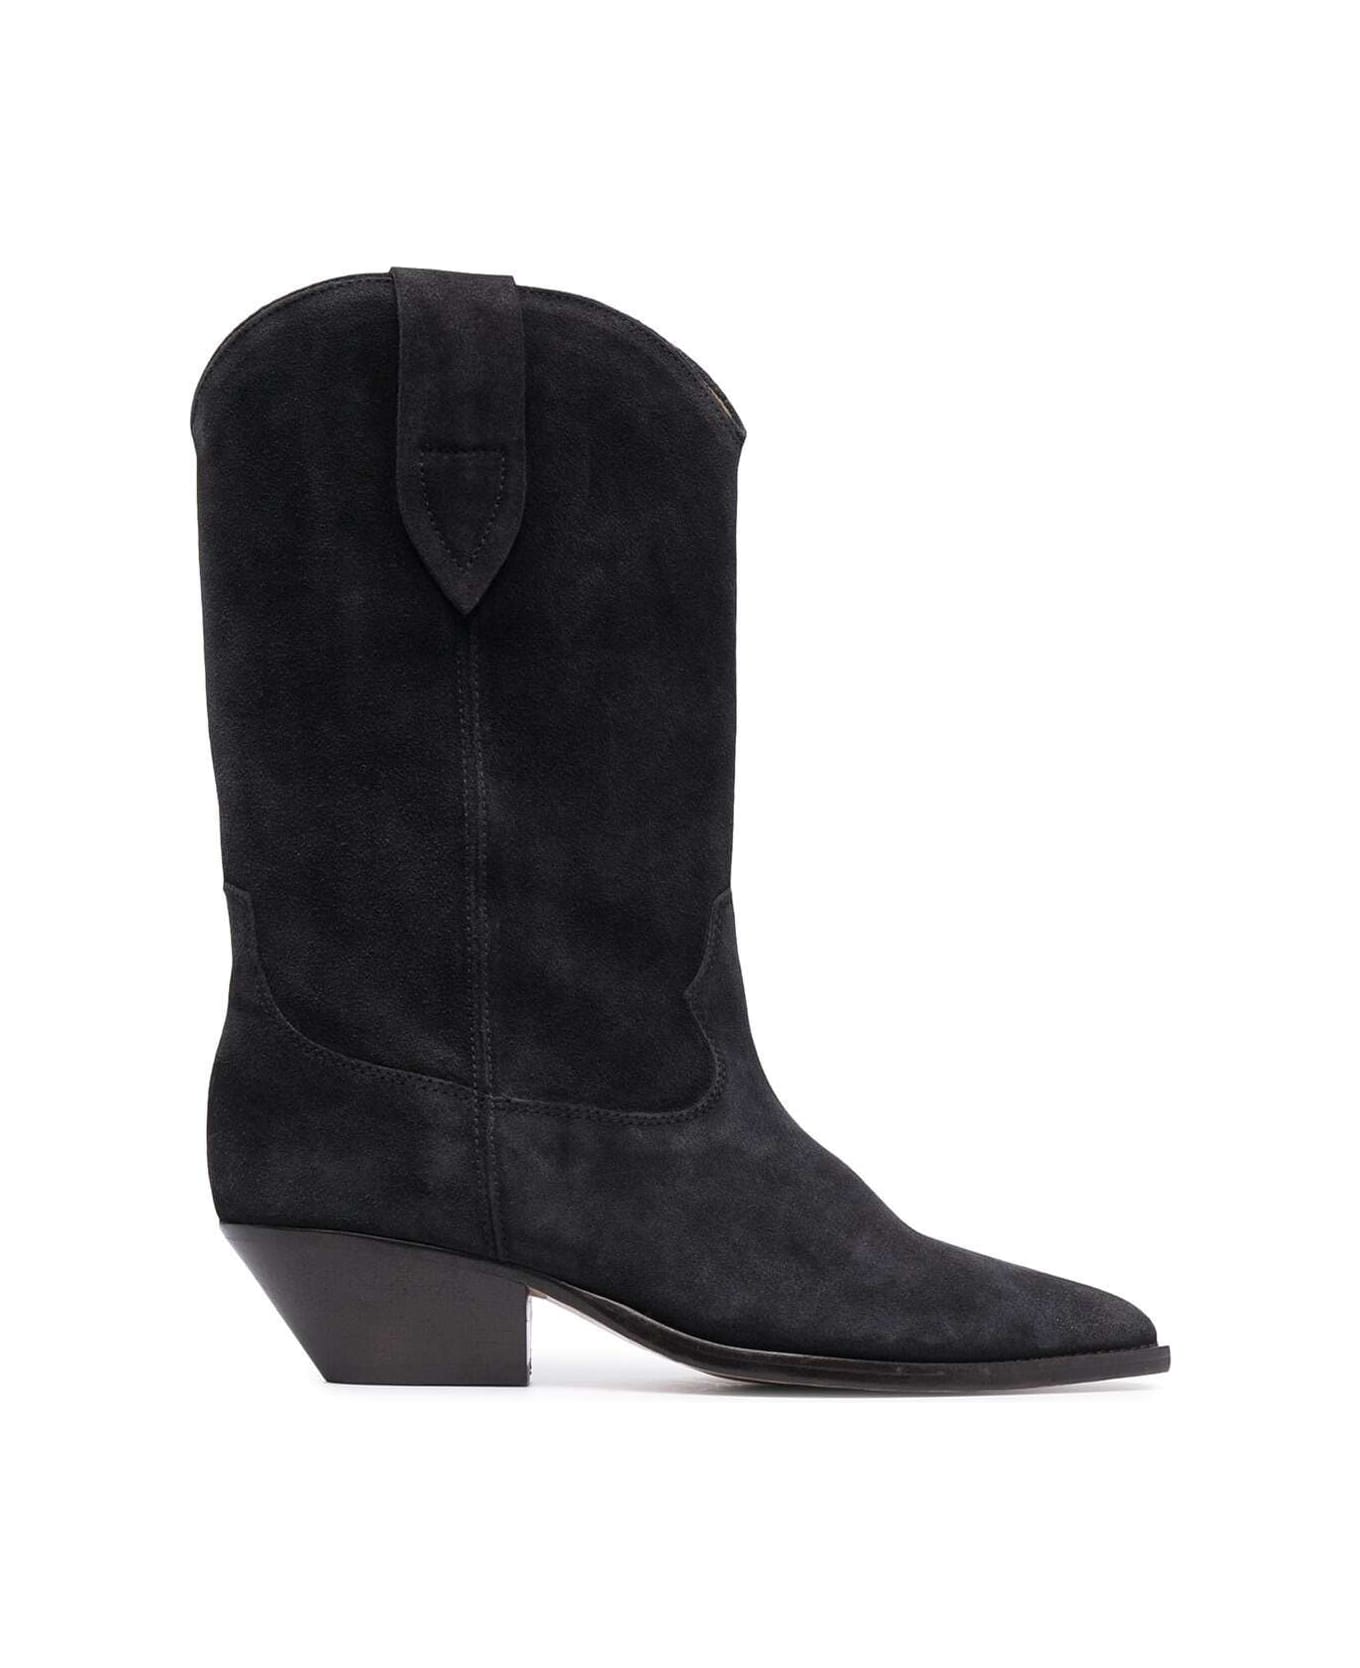 Isabel Marant Woman's Black Duerto Suede Boots - Black ブーツ